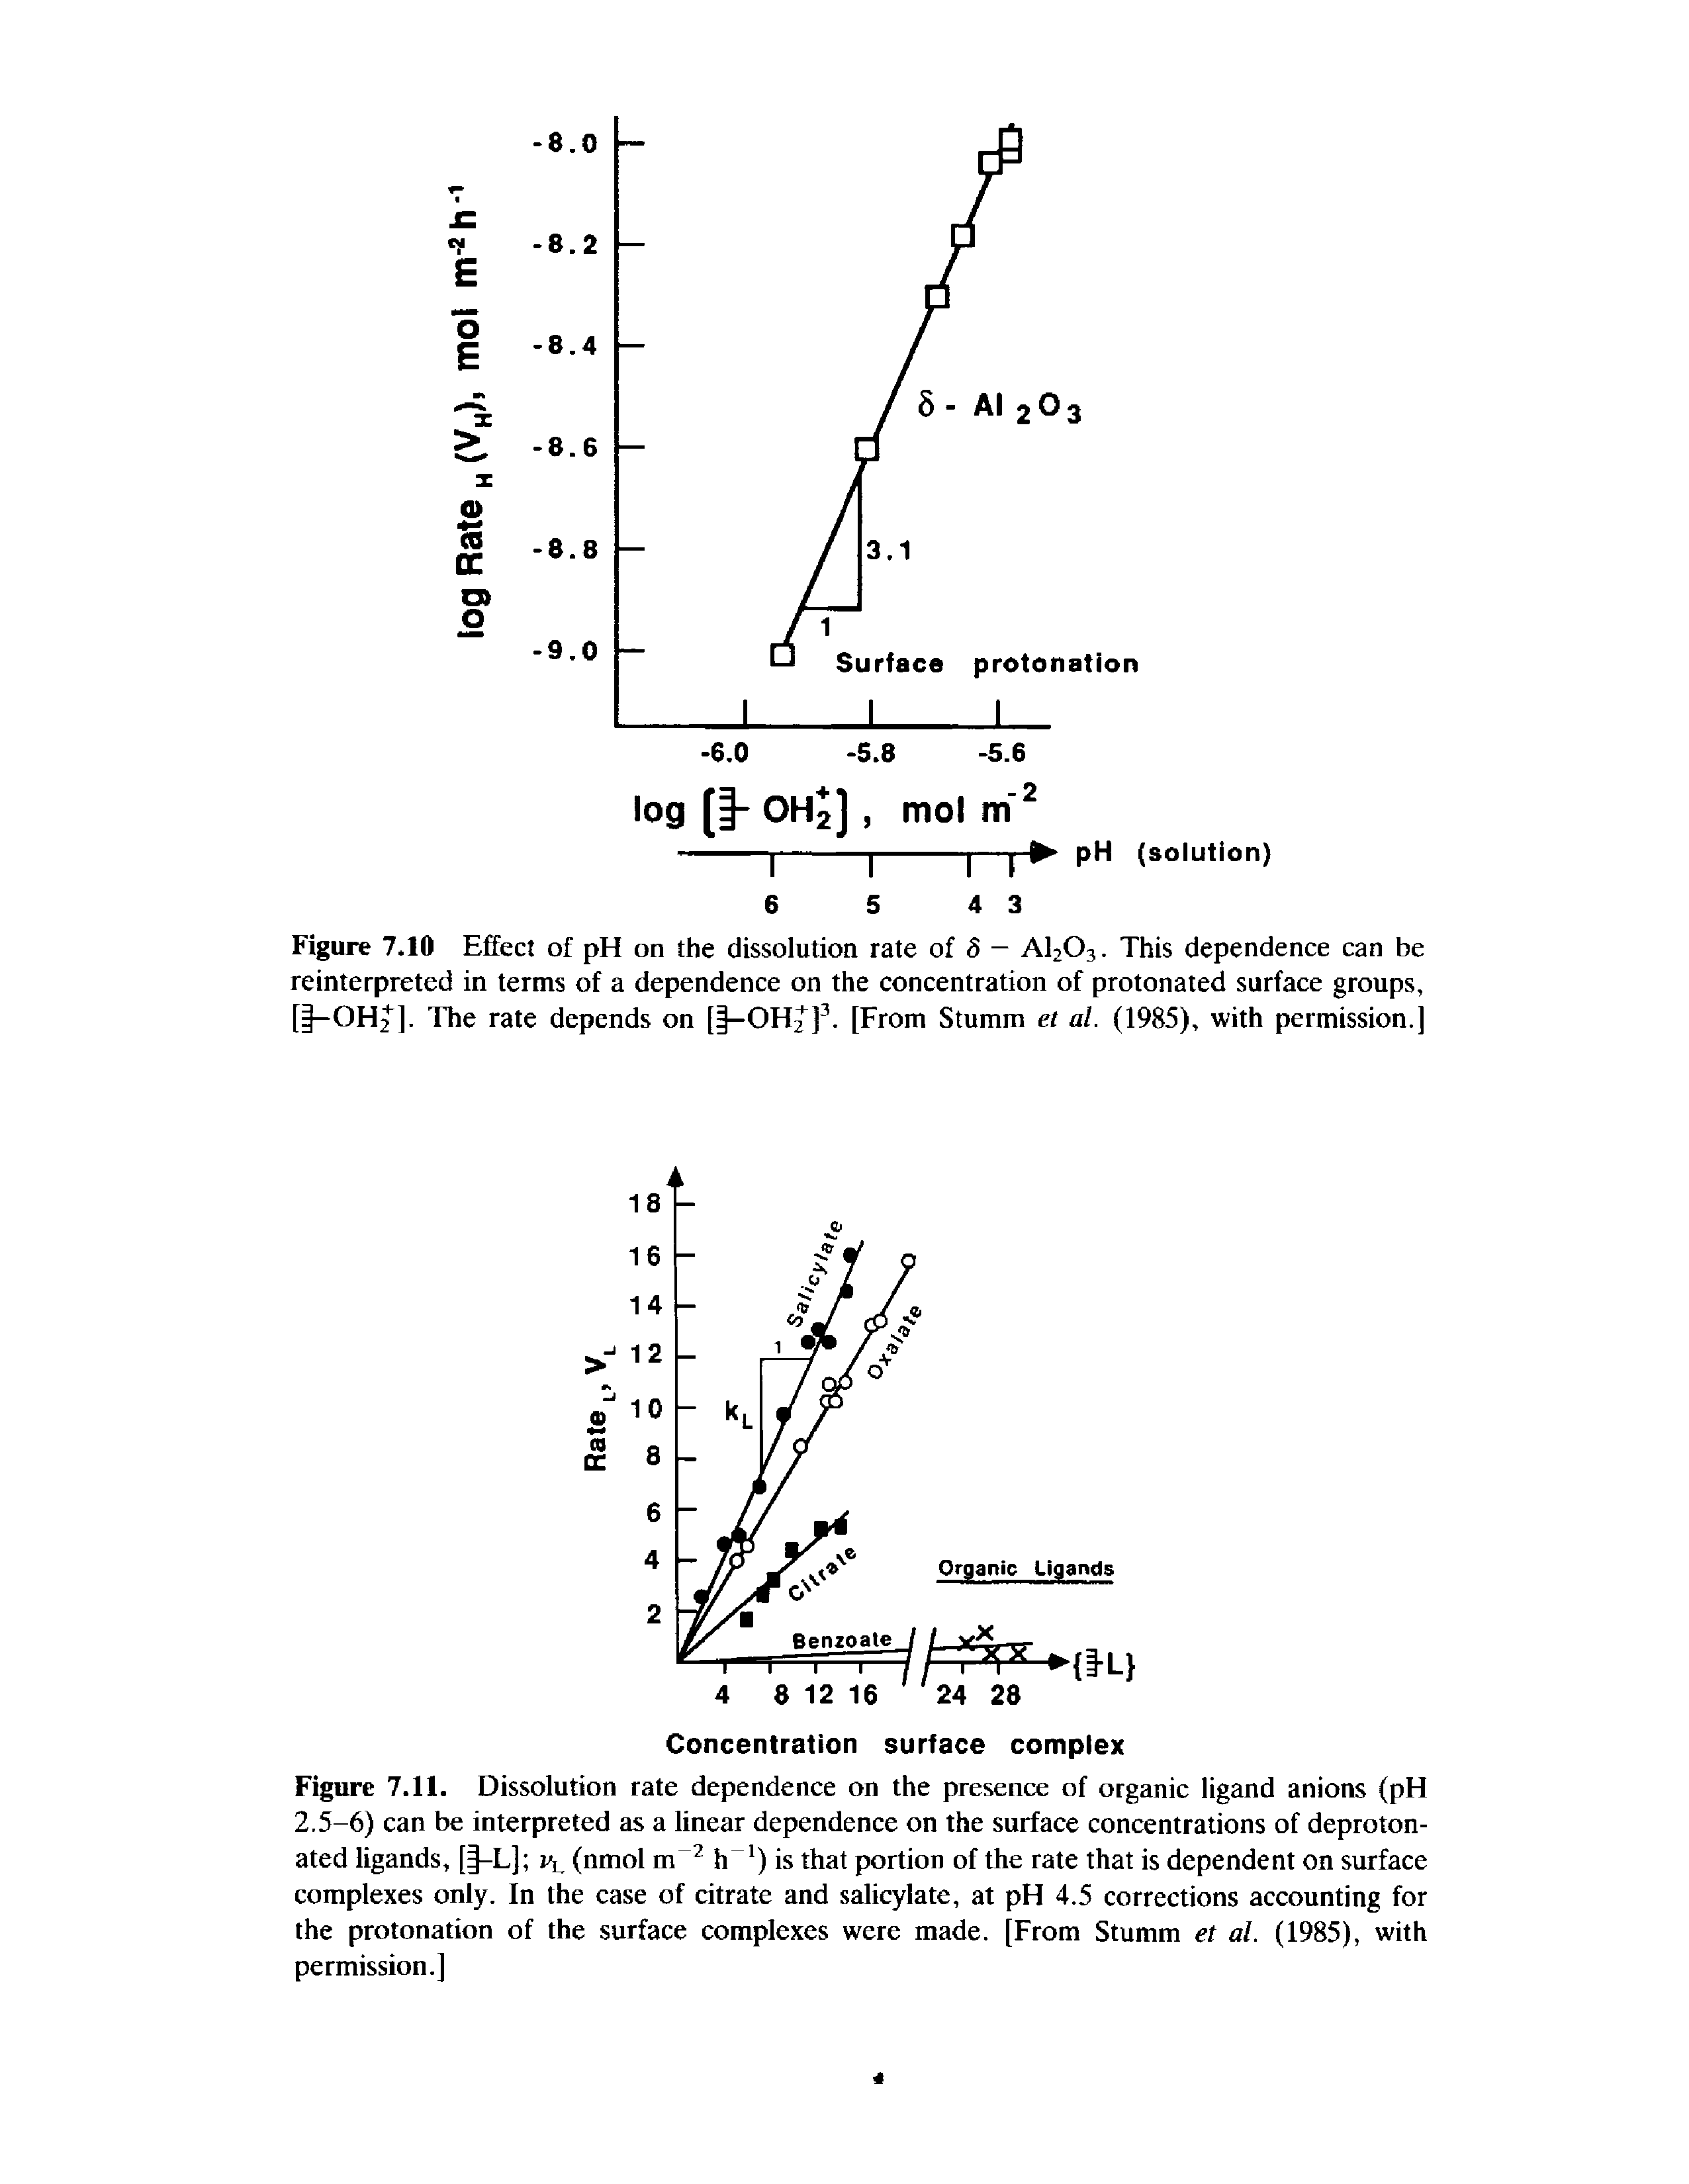 Figure 7.11. Dissolution rate dependence on the presence of organic ligand anions (pH 2.5-6) can be interpreted as a linear dependence on the surface concentrations of deproton-ated ligands, [ —L] jy (nmol m 2 h ) is that portion of the rate that is dependent on surface complexes only. In the case of citrate and salicylate, at pH 4.5 corrections accounting for the protonation of the surface complexes were made. [From Stumm et al. (1985), with permission.]...